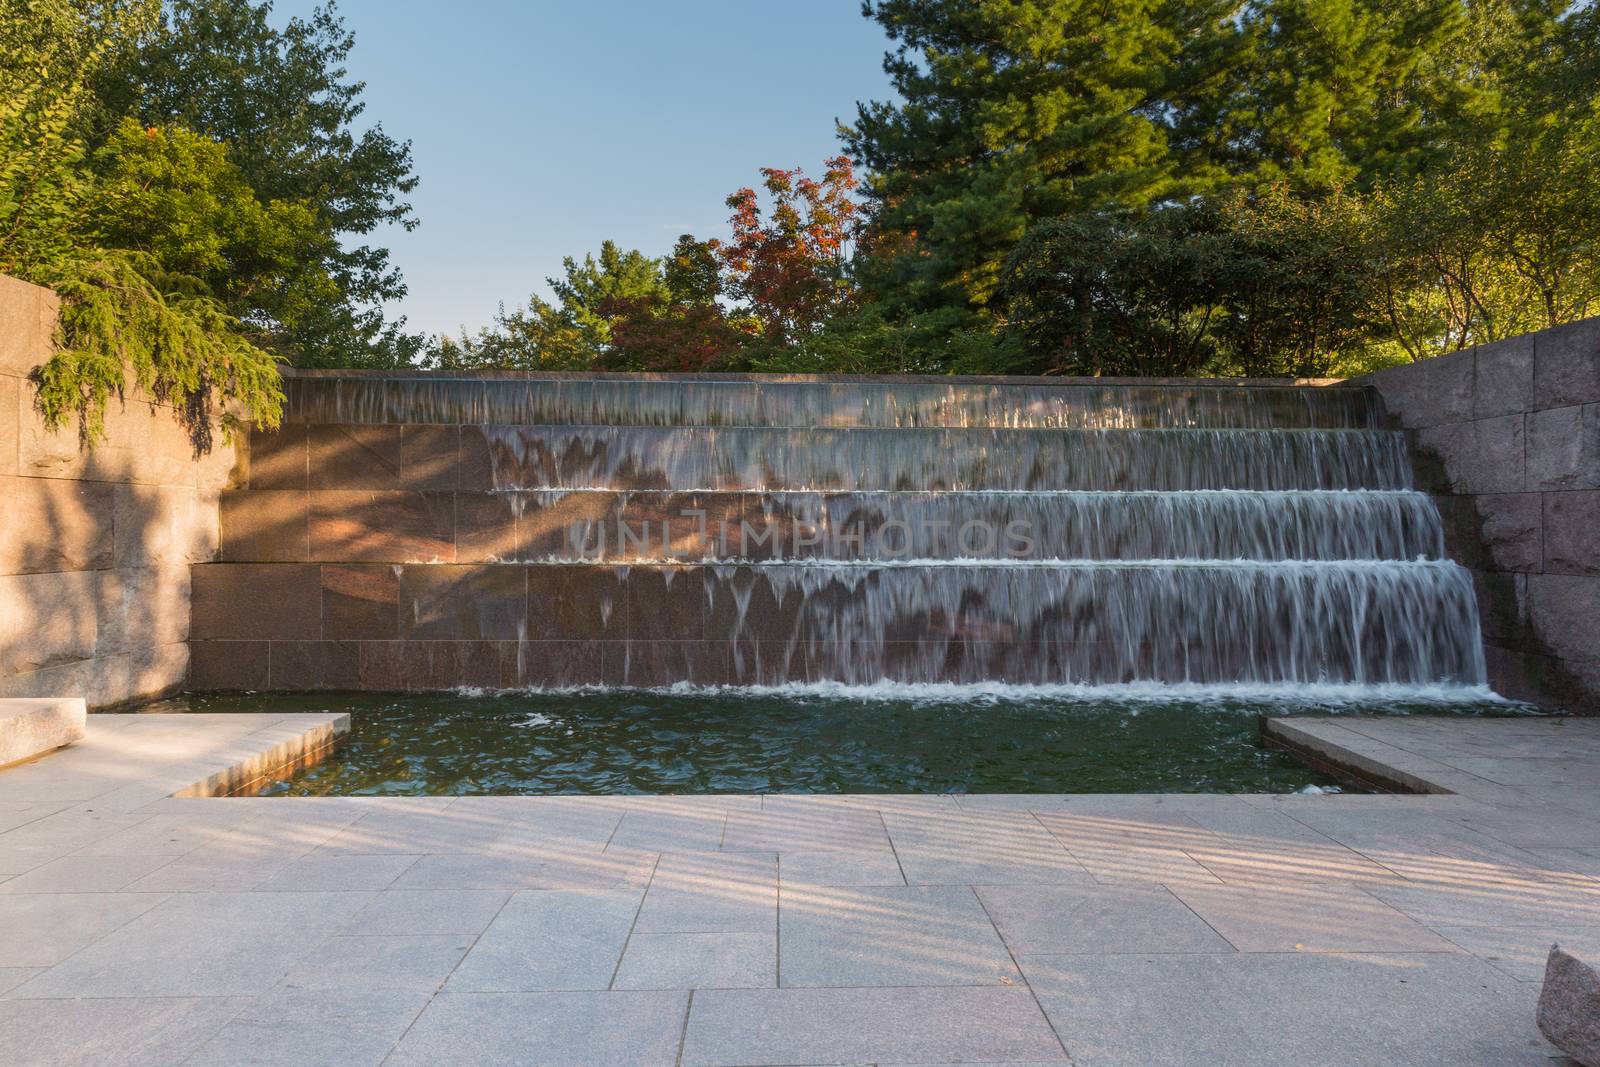 Waterfall in the FDR Memorial by chrisukphoto